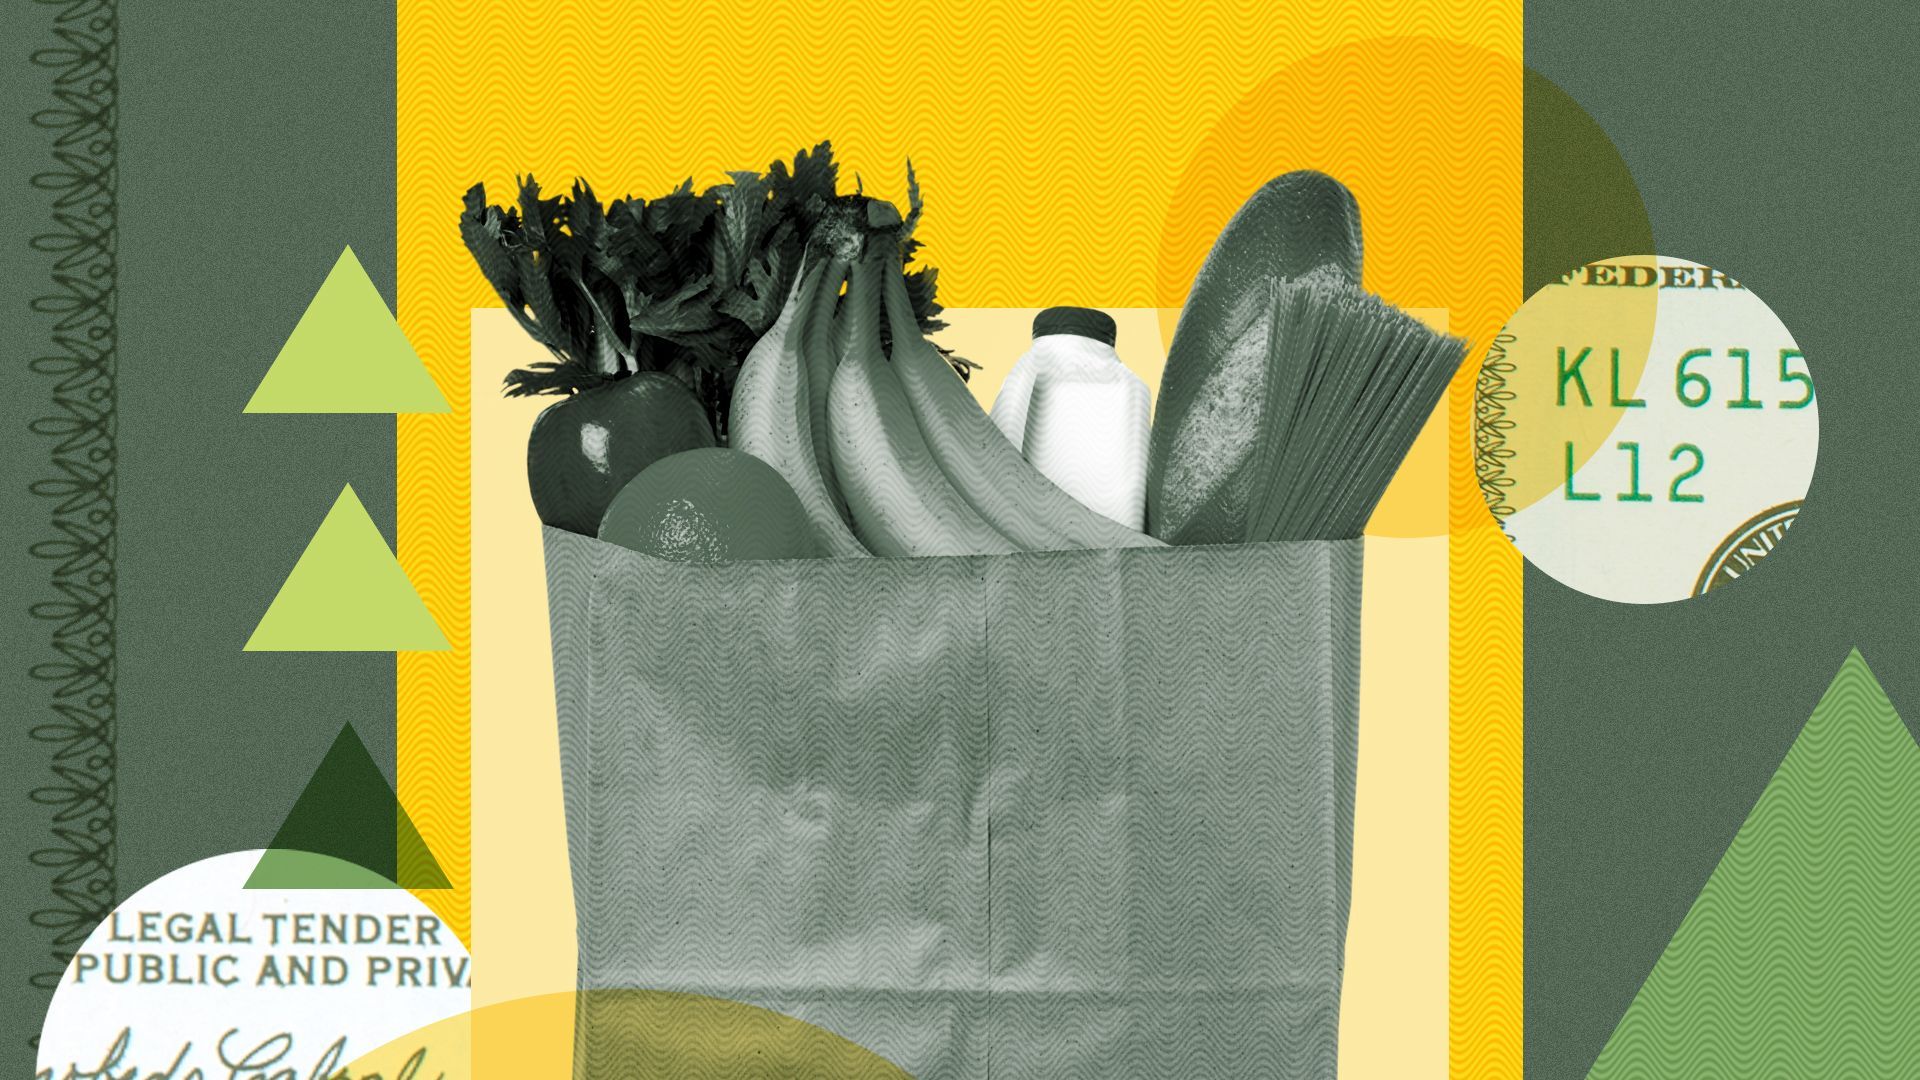 Illustration of a bag of groceries surrounded by shapes and money.